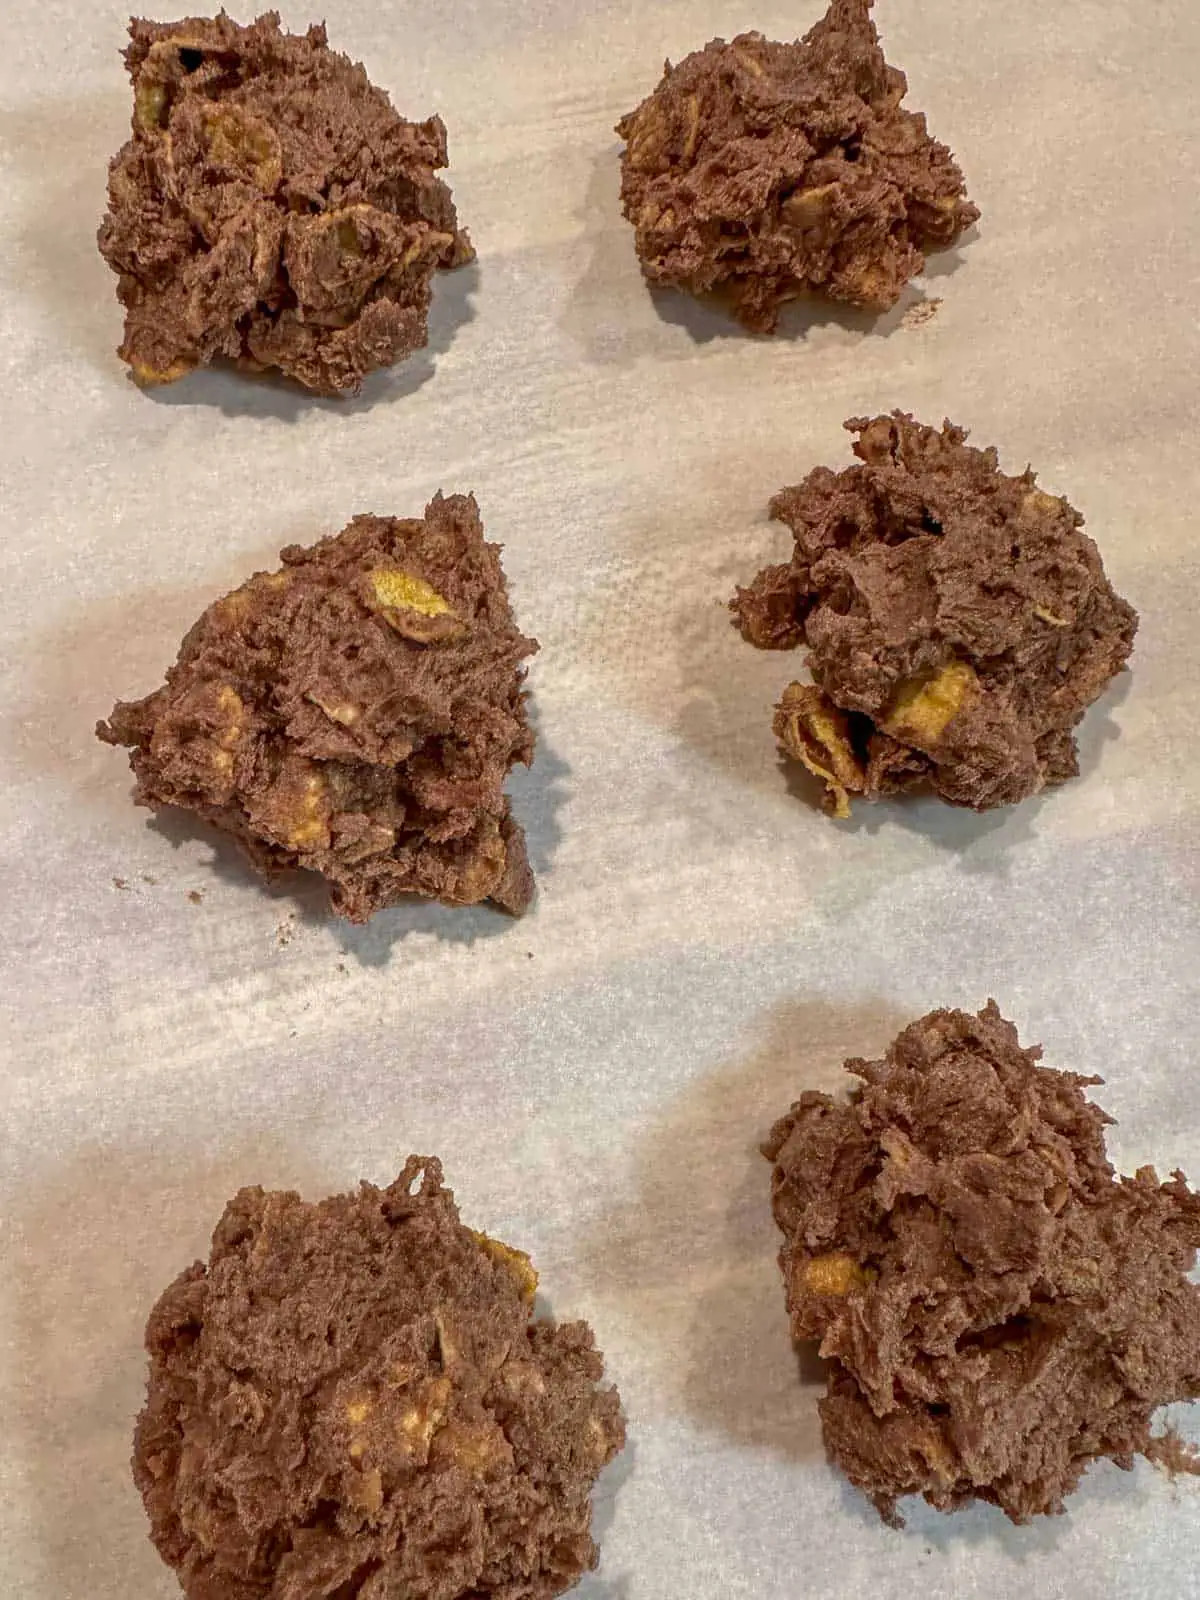 Chocolate Afghan cookie dough with cornflakes shaped into small balls and placed on parchment paper.